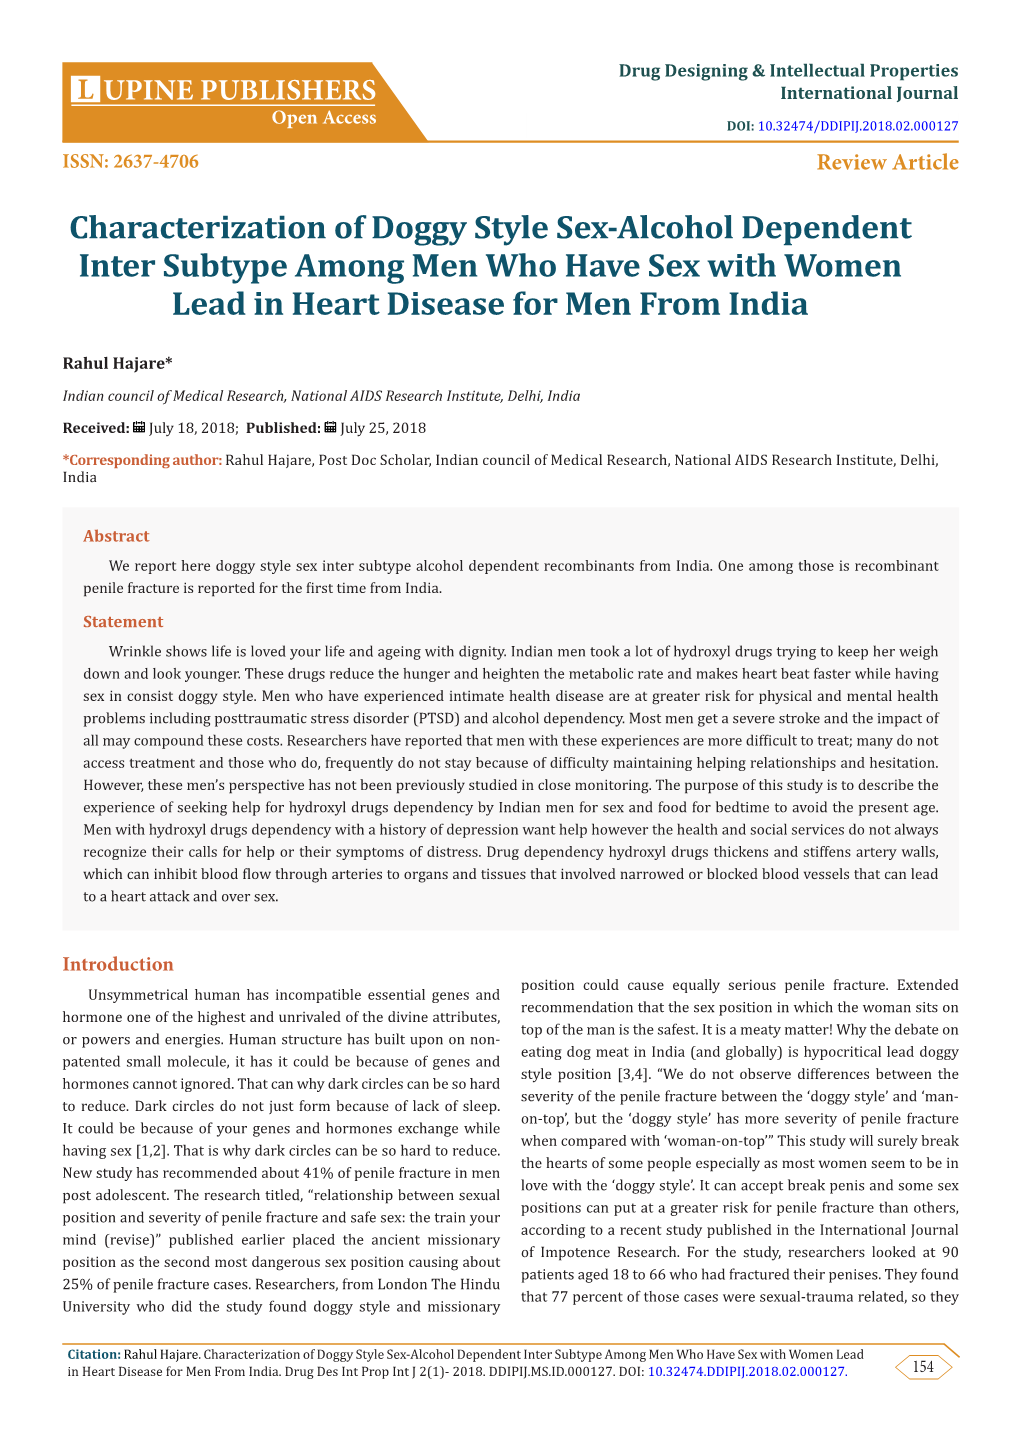 Characterization of Doggy Style Sex-Alcohol Dependent Inter Subtype Among Men Who Have Sex with Women Lead in Heart Disease for Men from India